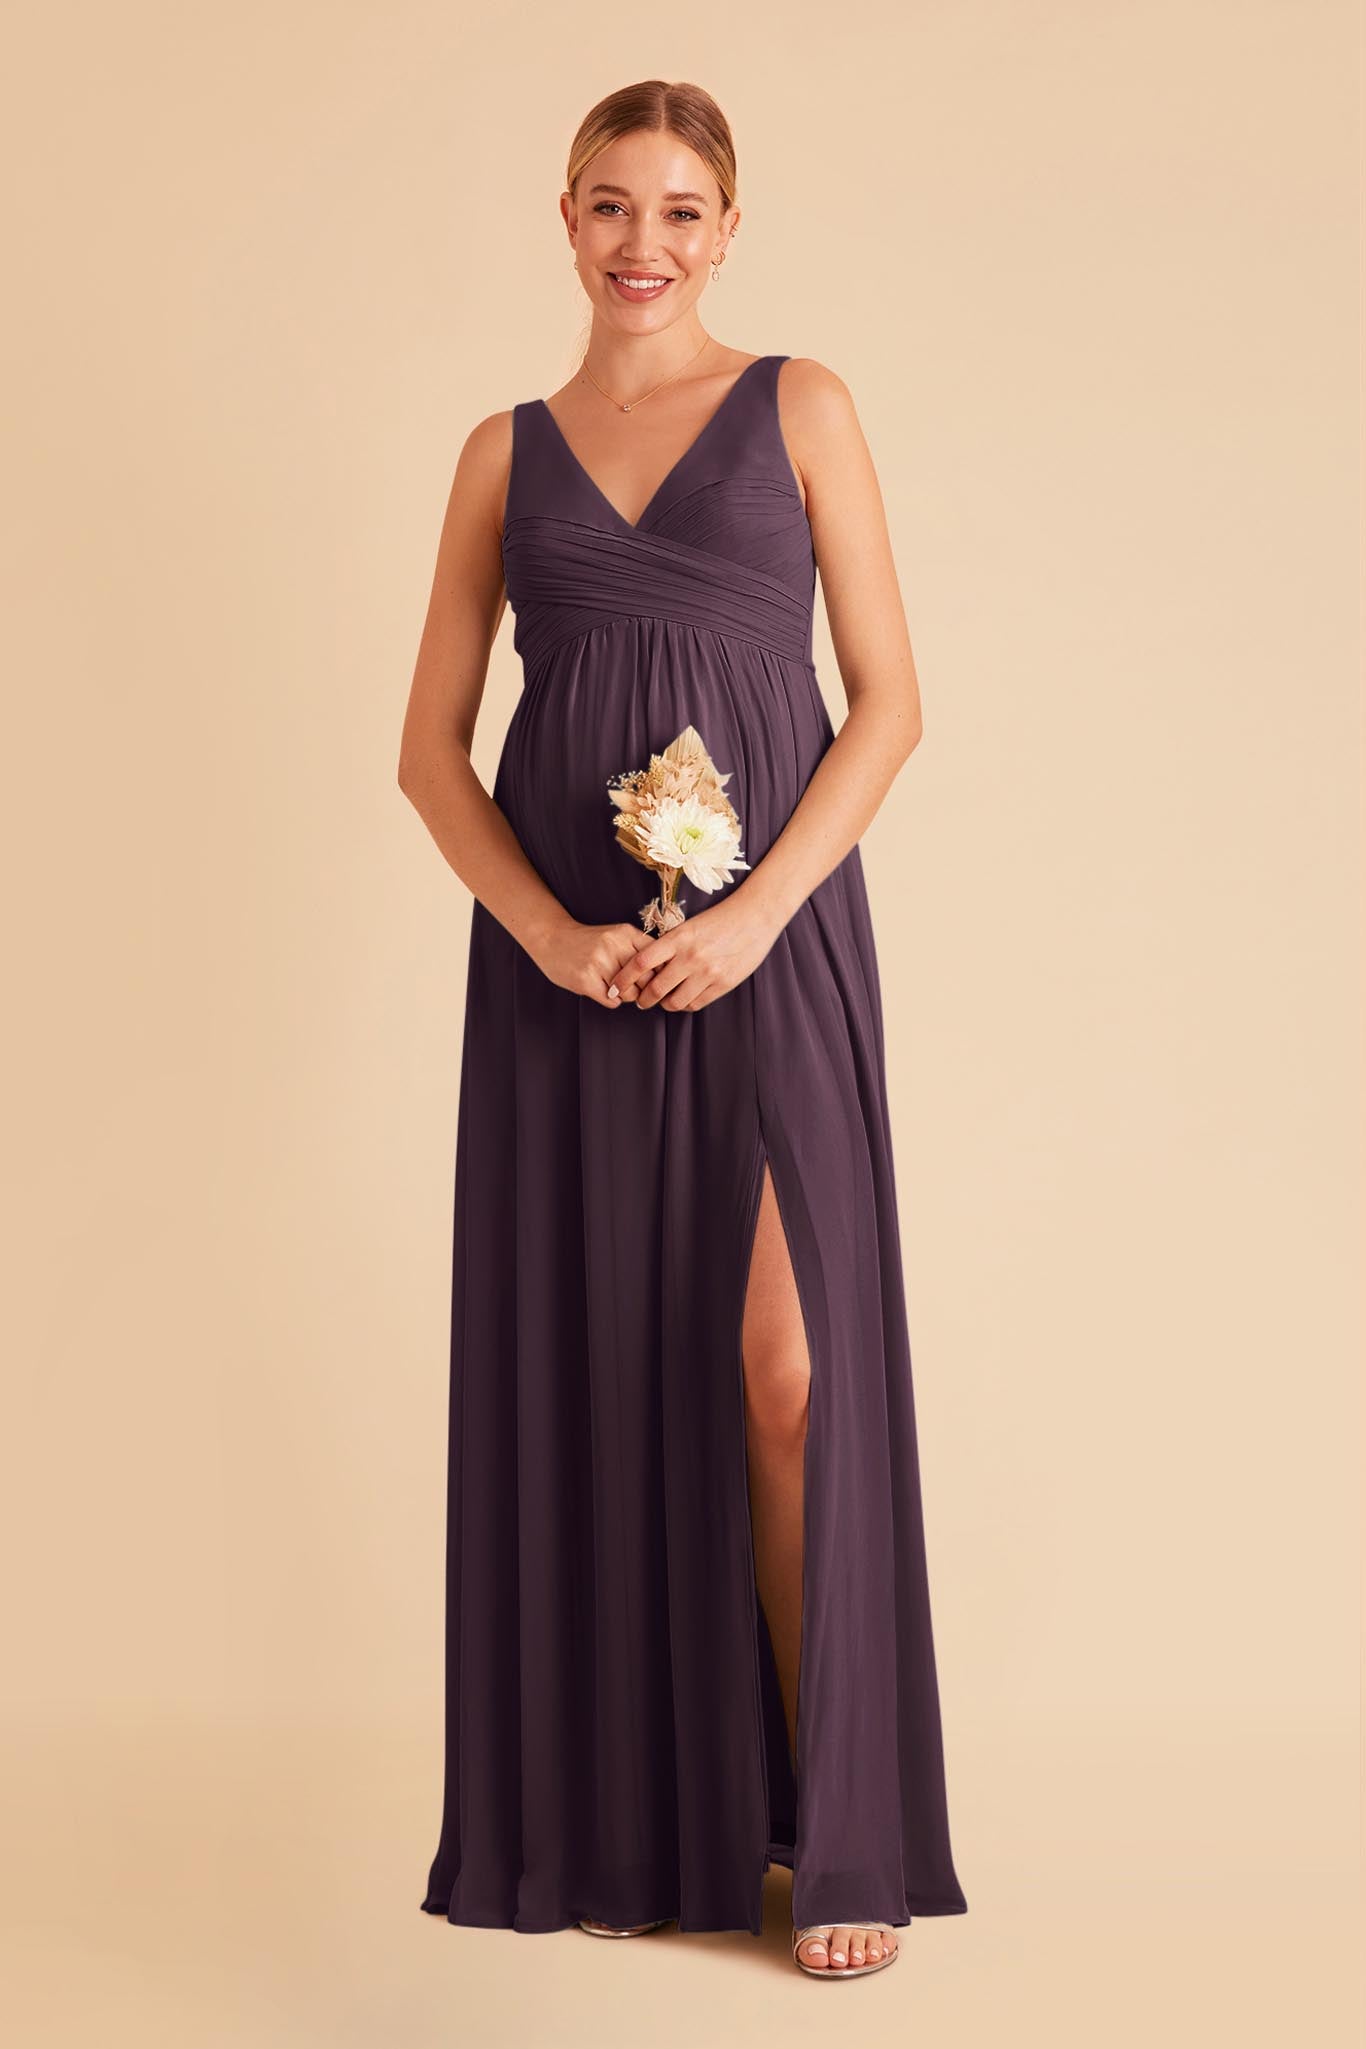 Plum Laurie Empire Dress by Birdy Grey